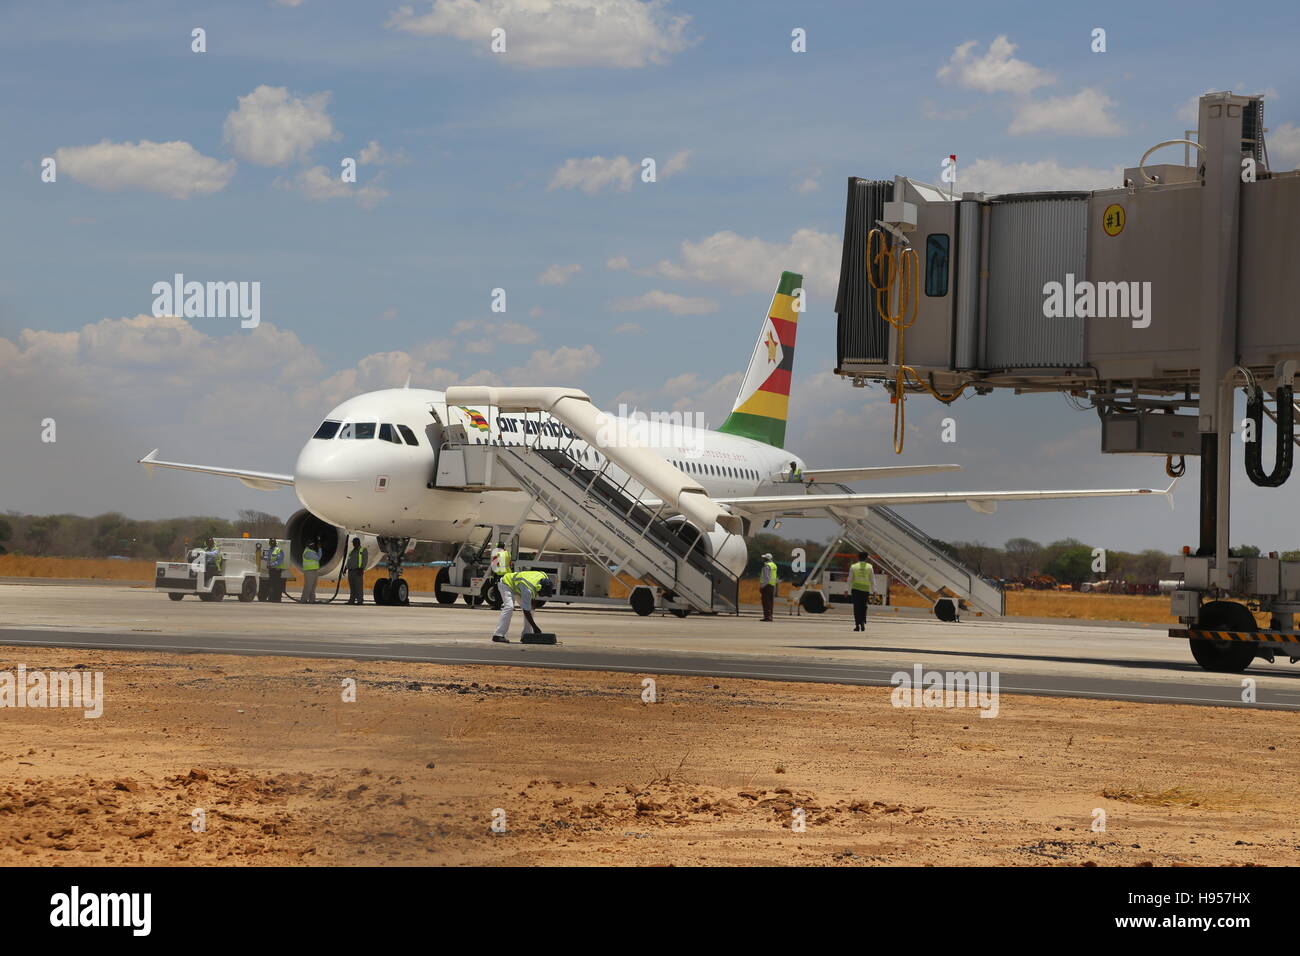 (161118) -- VICTORIA FALLS (ZIMBABWE), Nov. 18, 2016 (Xinhua) -- An Air Zimbabwe airplane is seen on the runway of Victoria Falls International Airport in Victoria Falls, Zimbabwe, on Nov. 18, 2016. Zimbabwean President Robert Mugabe on Friday commissioned the upgraded Victoria Falls International Airport that was built with support from China. (Xinhua/Chen Yaqin) Stock Photo